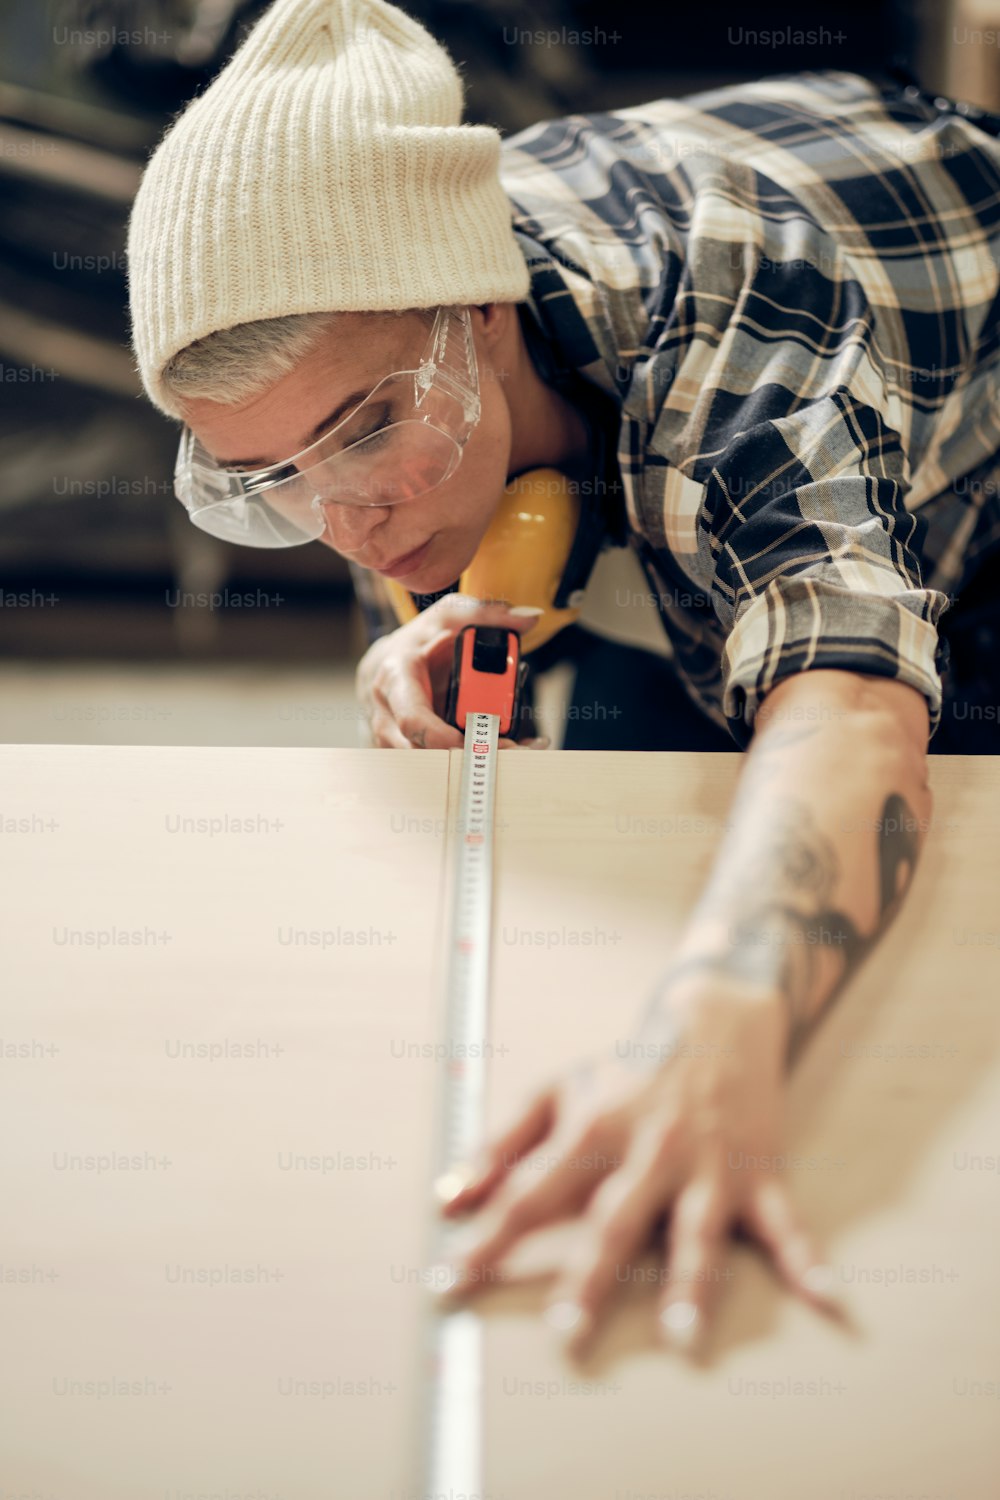 Portrait of tattooed woman in her 40s working at carpentry in protective eyewear, measuring wooden plank. Masculine occupation, male job, gender equality concept